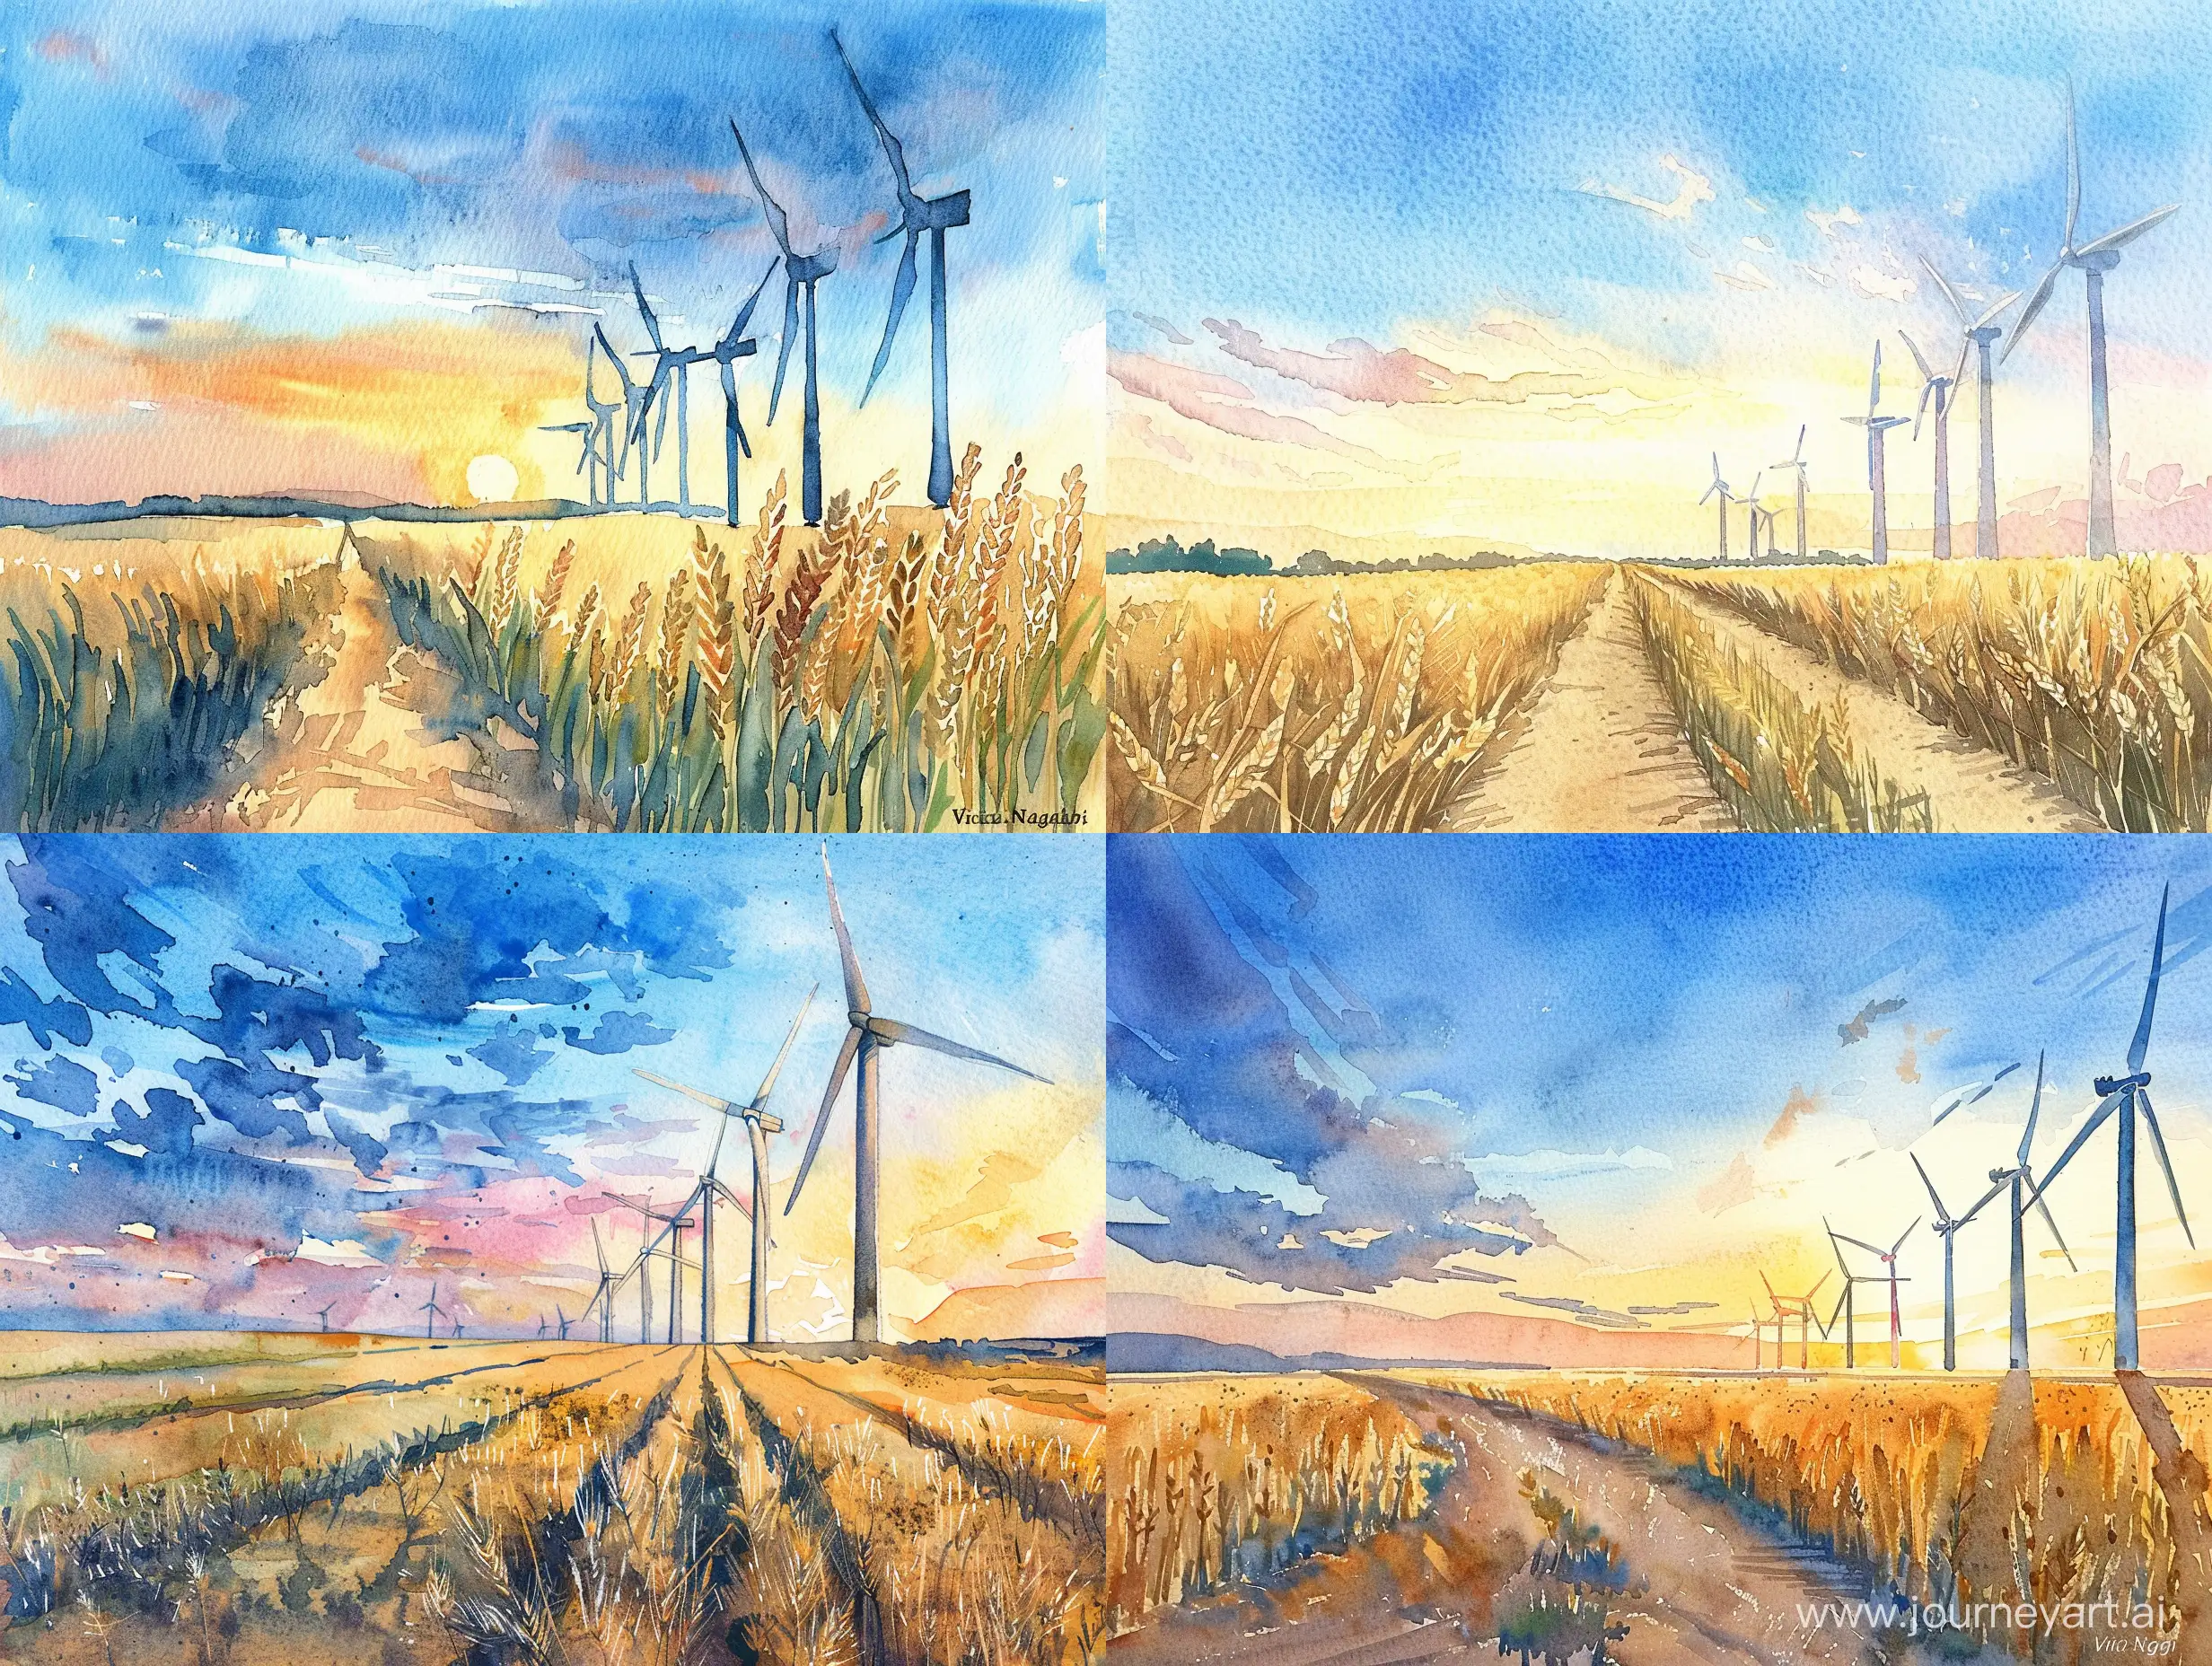 On a flat wheat field, on the right there are wind turbines, against the background of a sunset blue sky, watercolor style, Victor Ngai